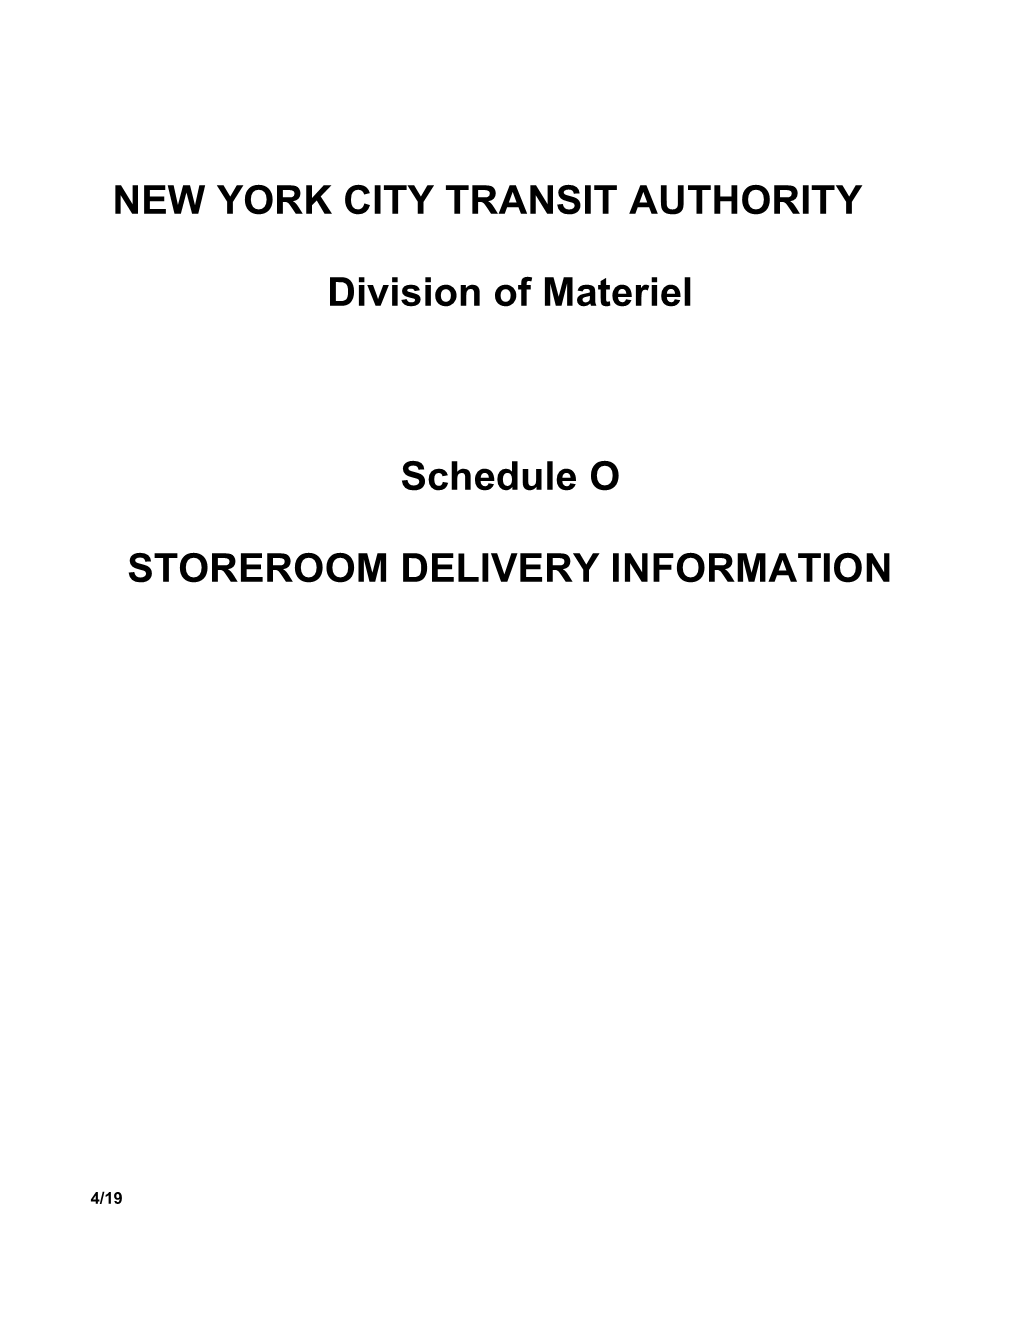 NEW YORK CITY TRANSIT AUTHORITY Division of Materiel